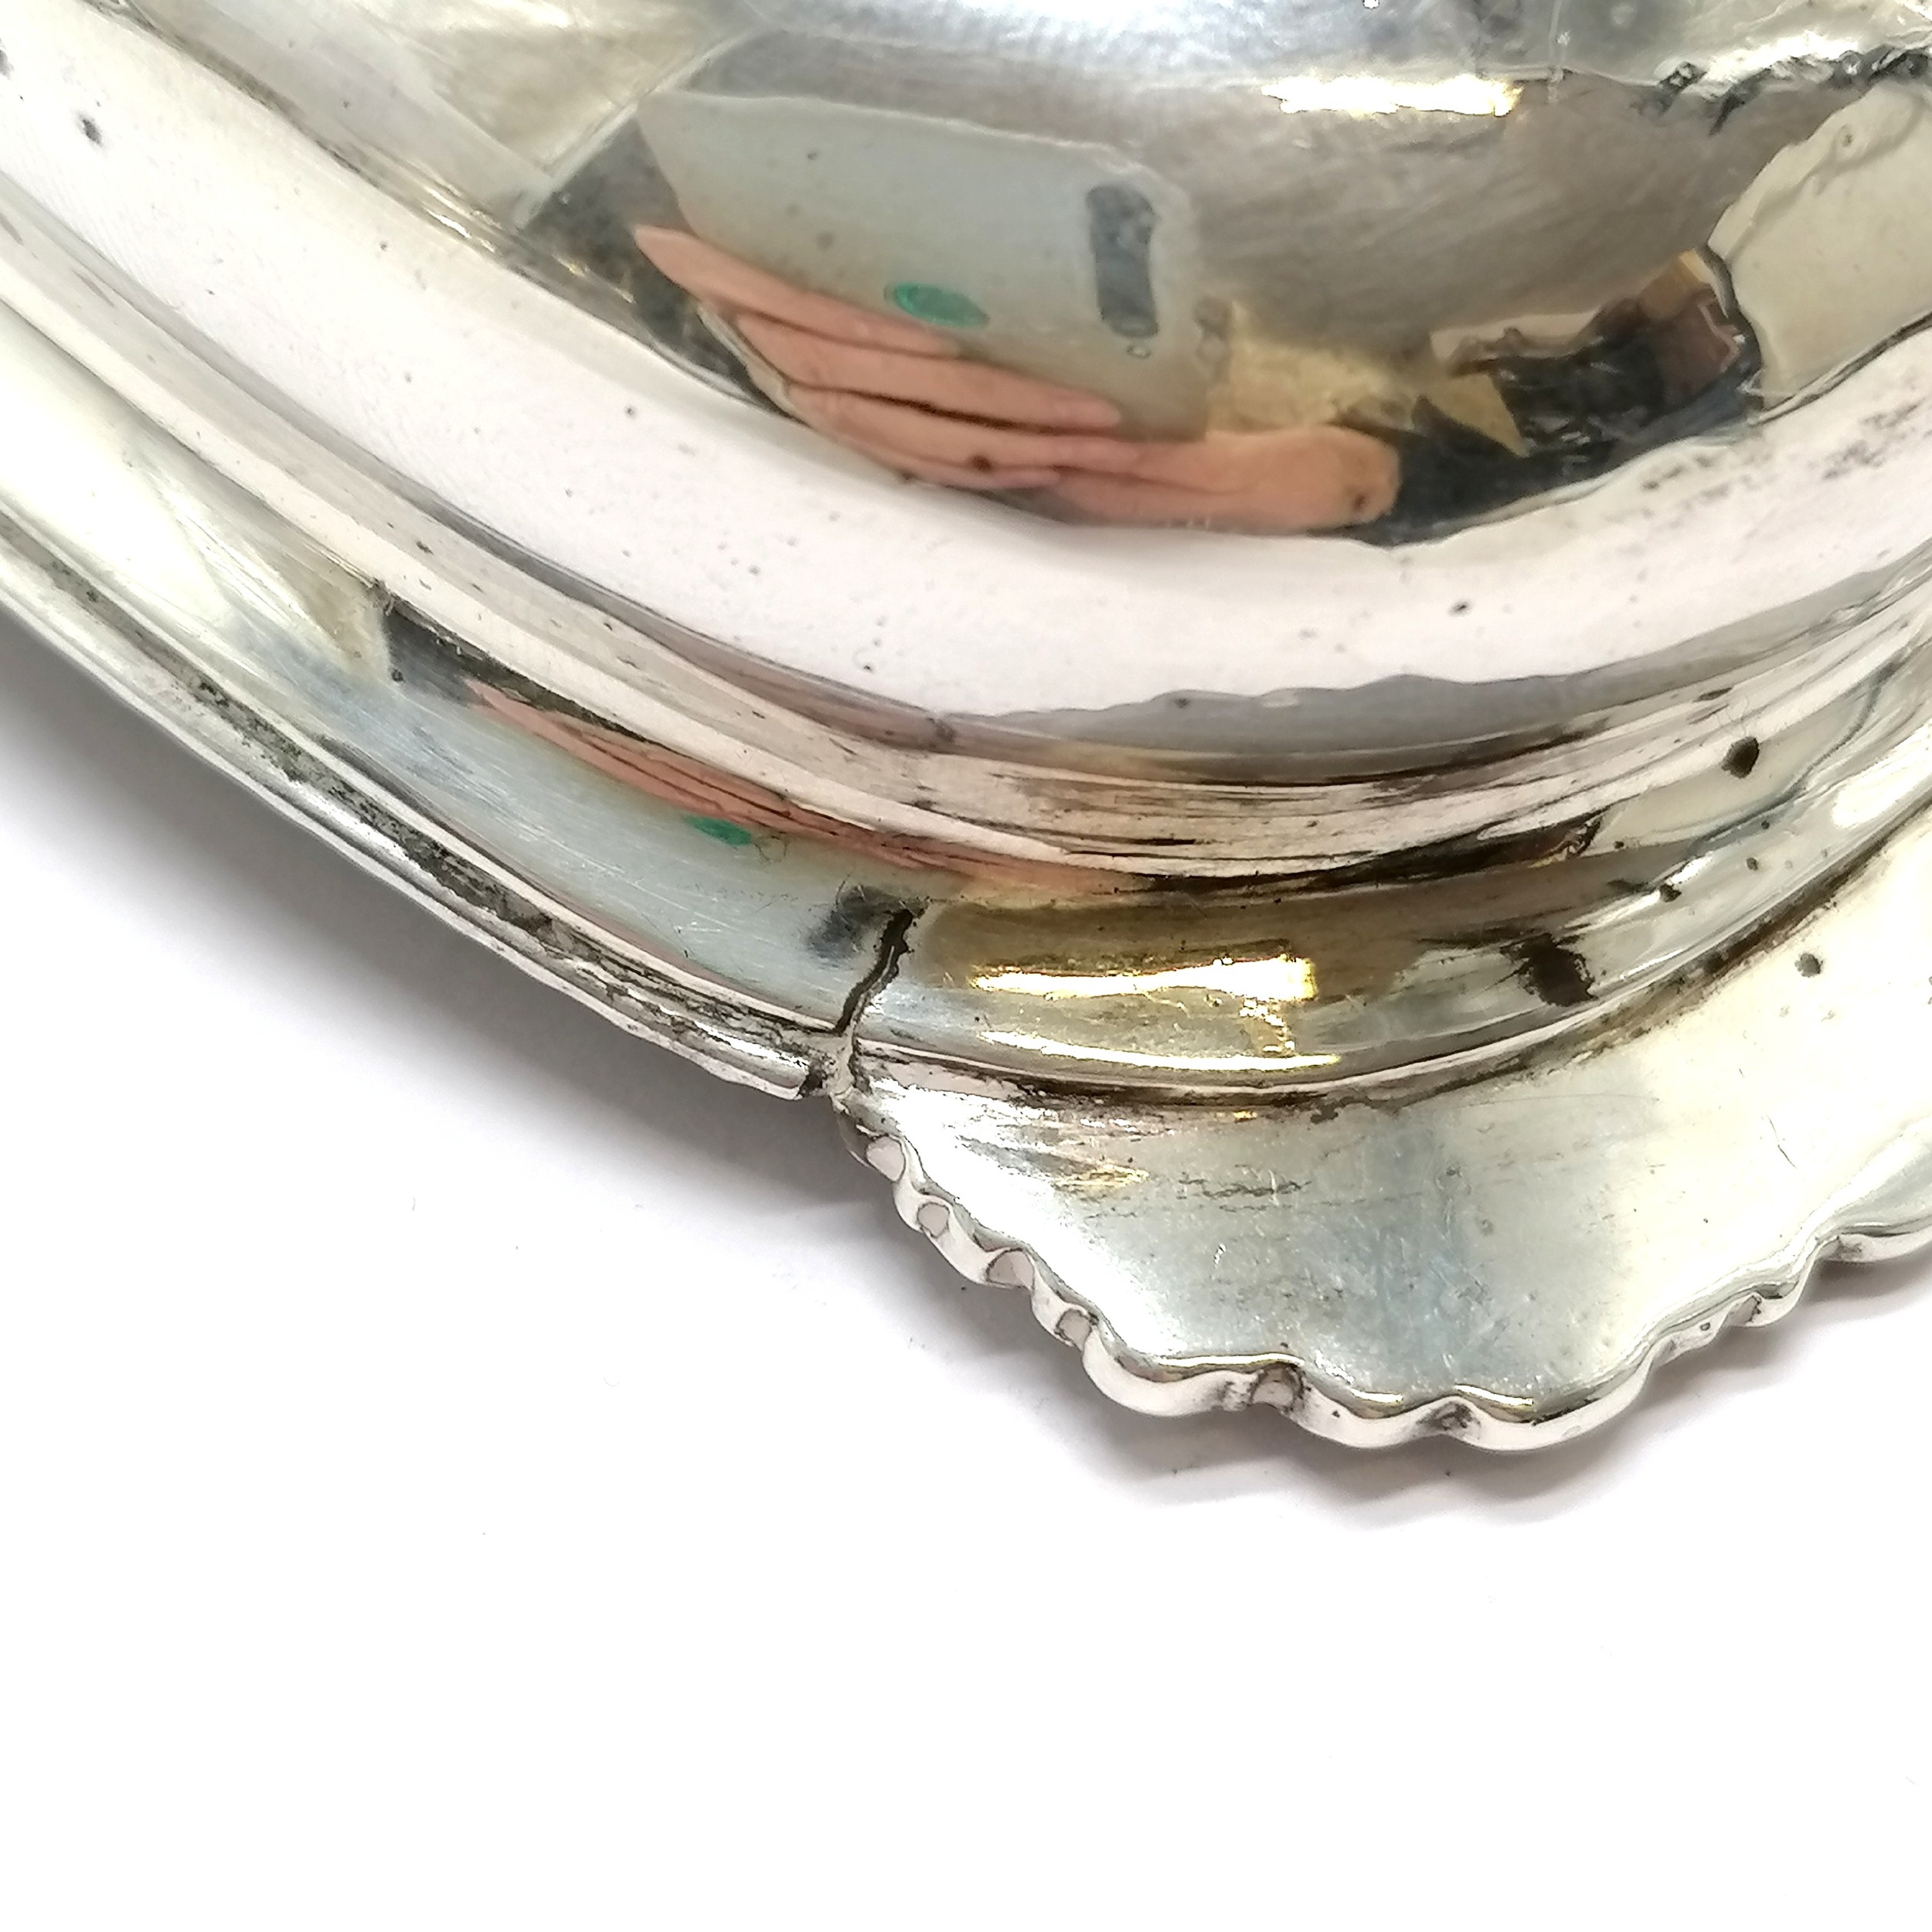 Silver salt cellar by Lambert & Co (George Lambert) with 1895 inscription Presented by Captain C B - Image 2 of 3